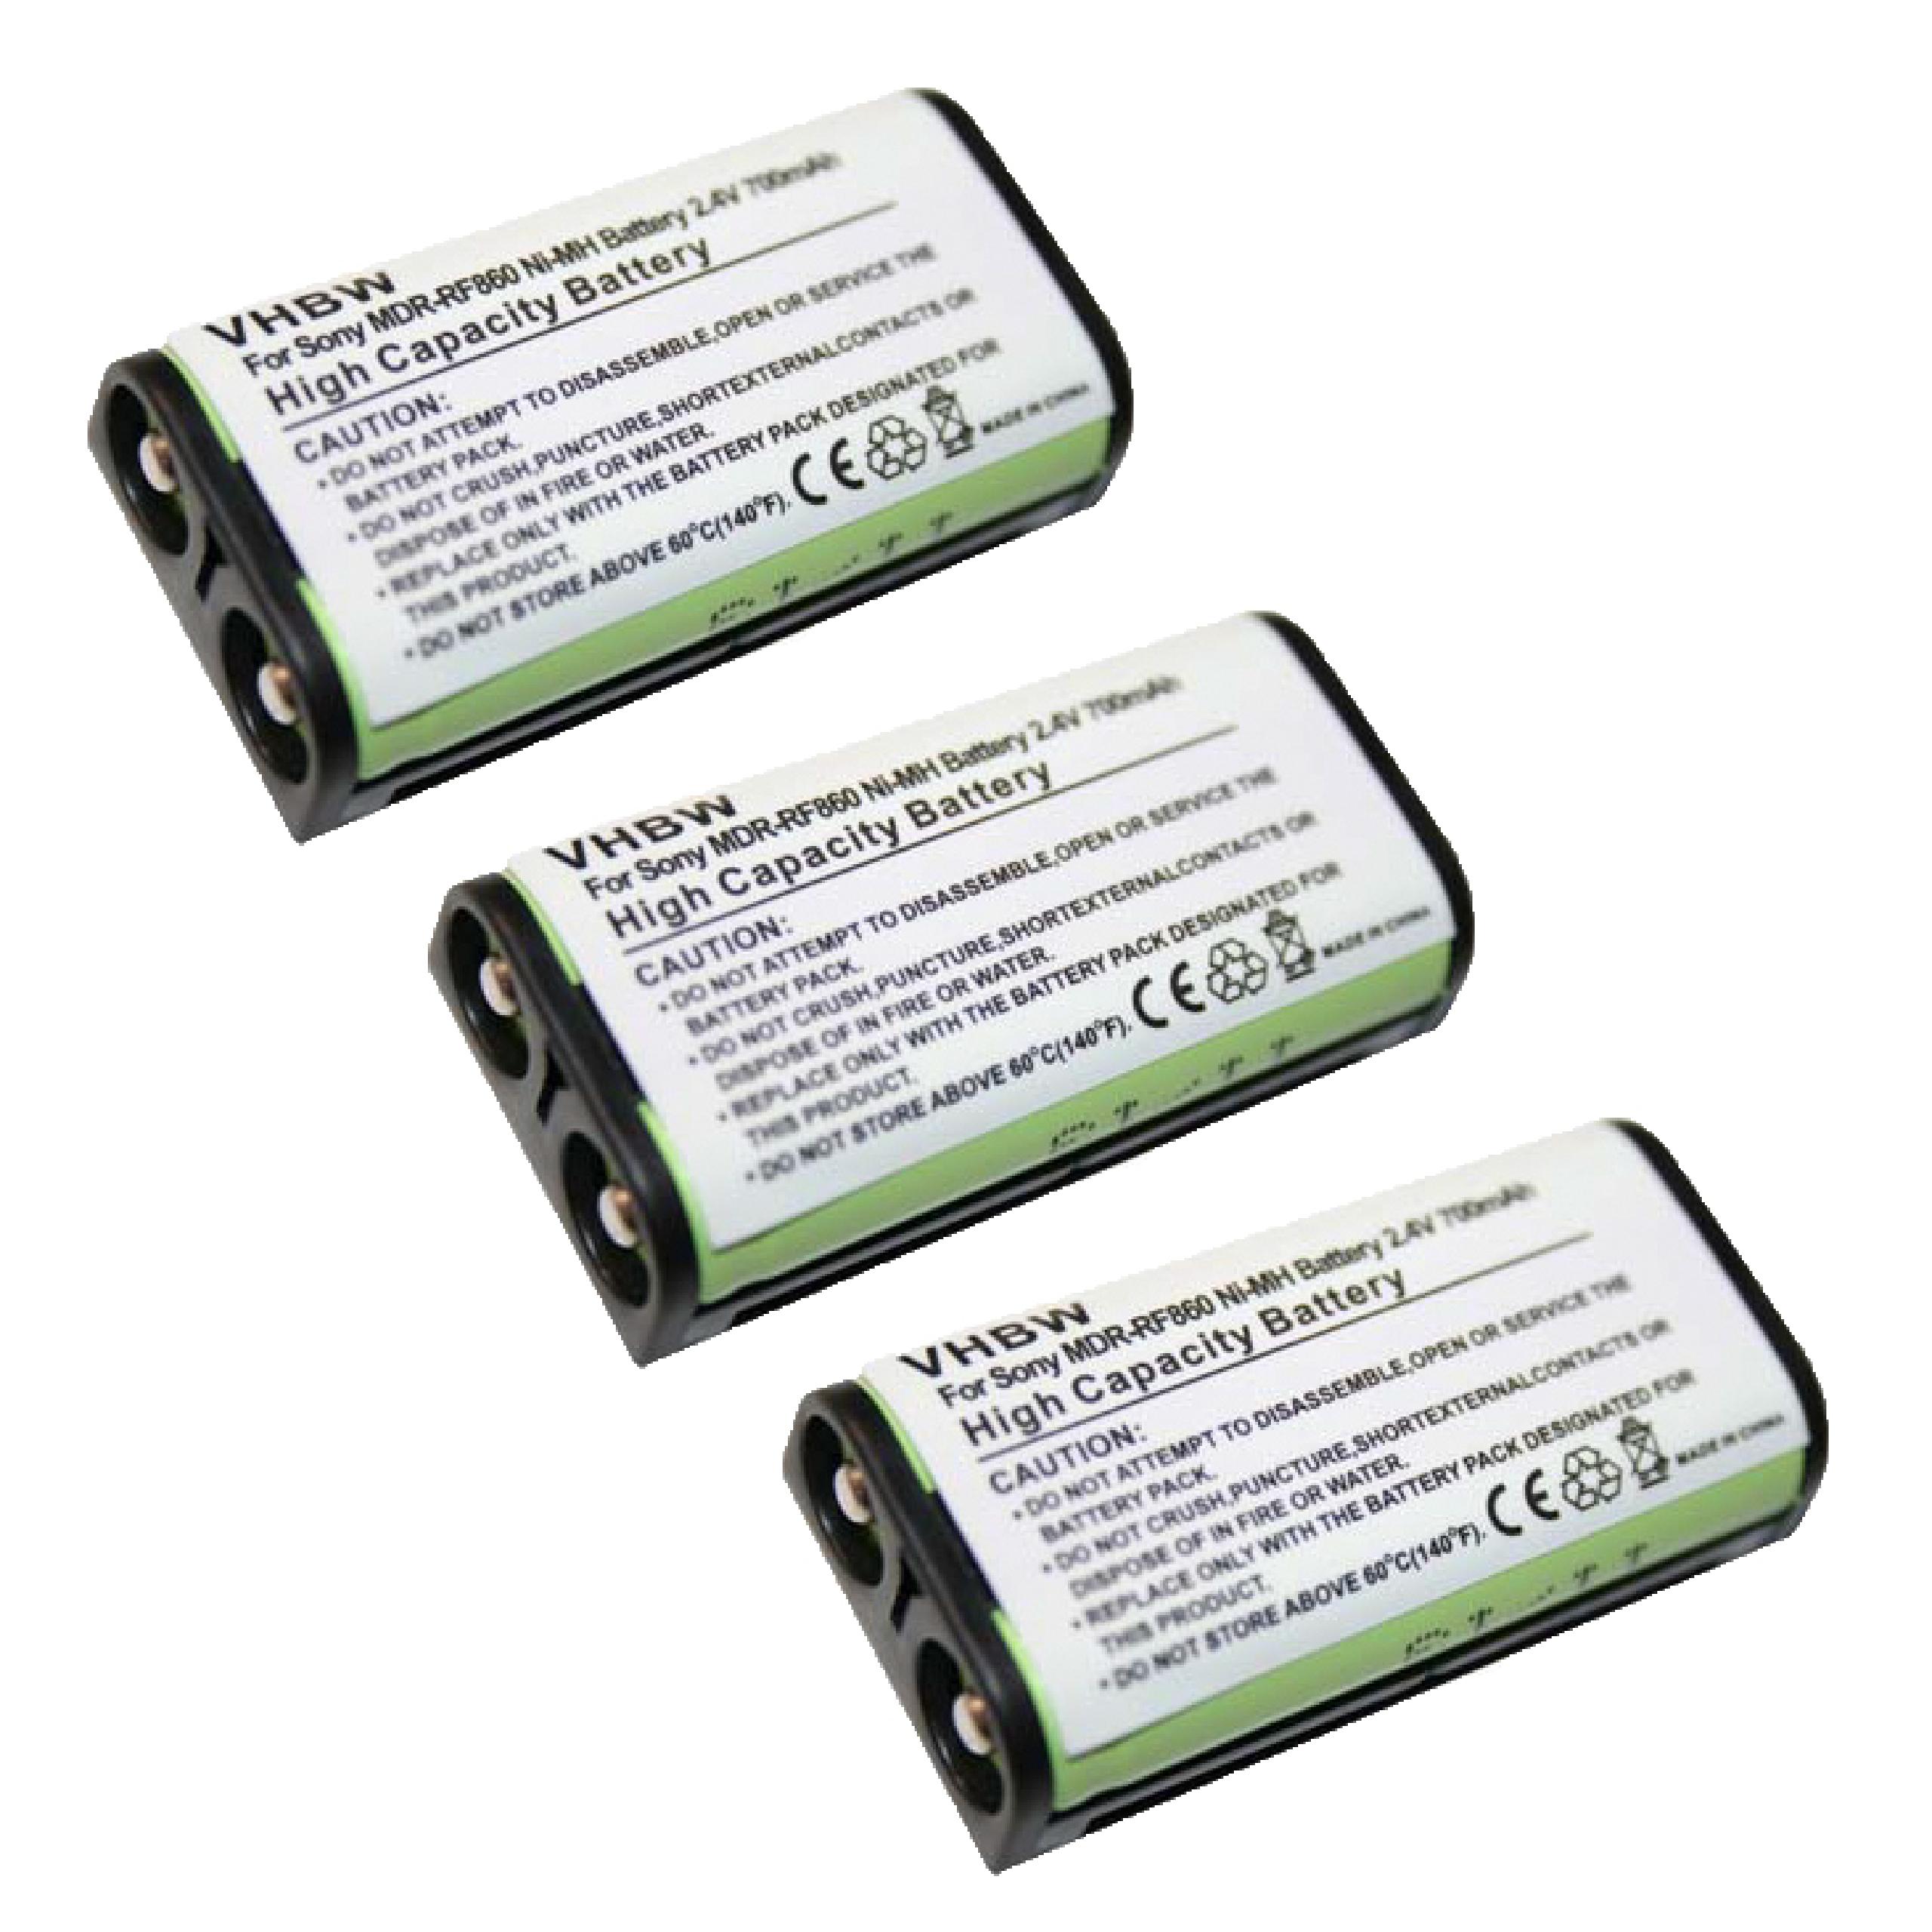 Wireless Headset Battery (3 Units) Replacement for Sony BP-HP550-11 - 700mAh 2.4V NiMH